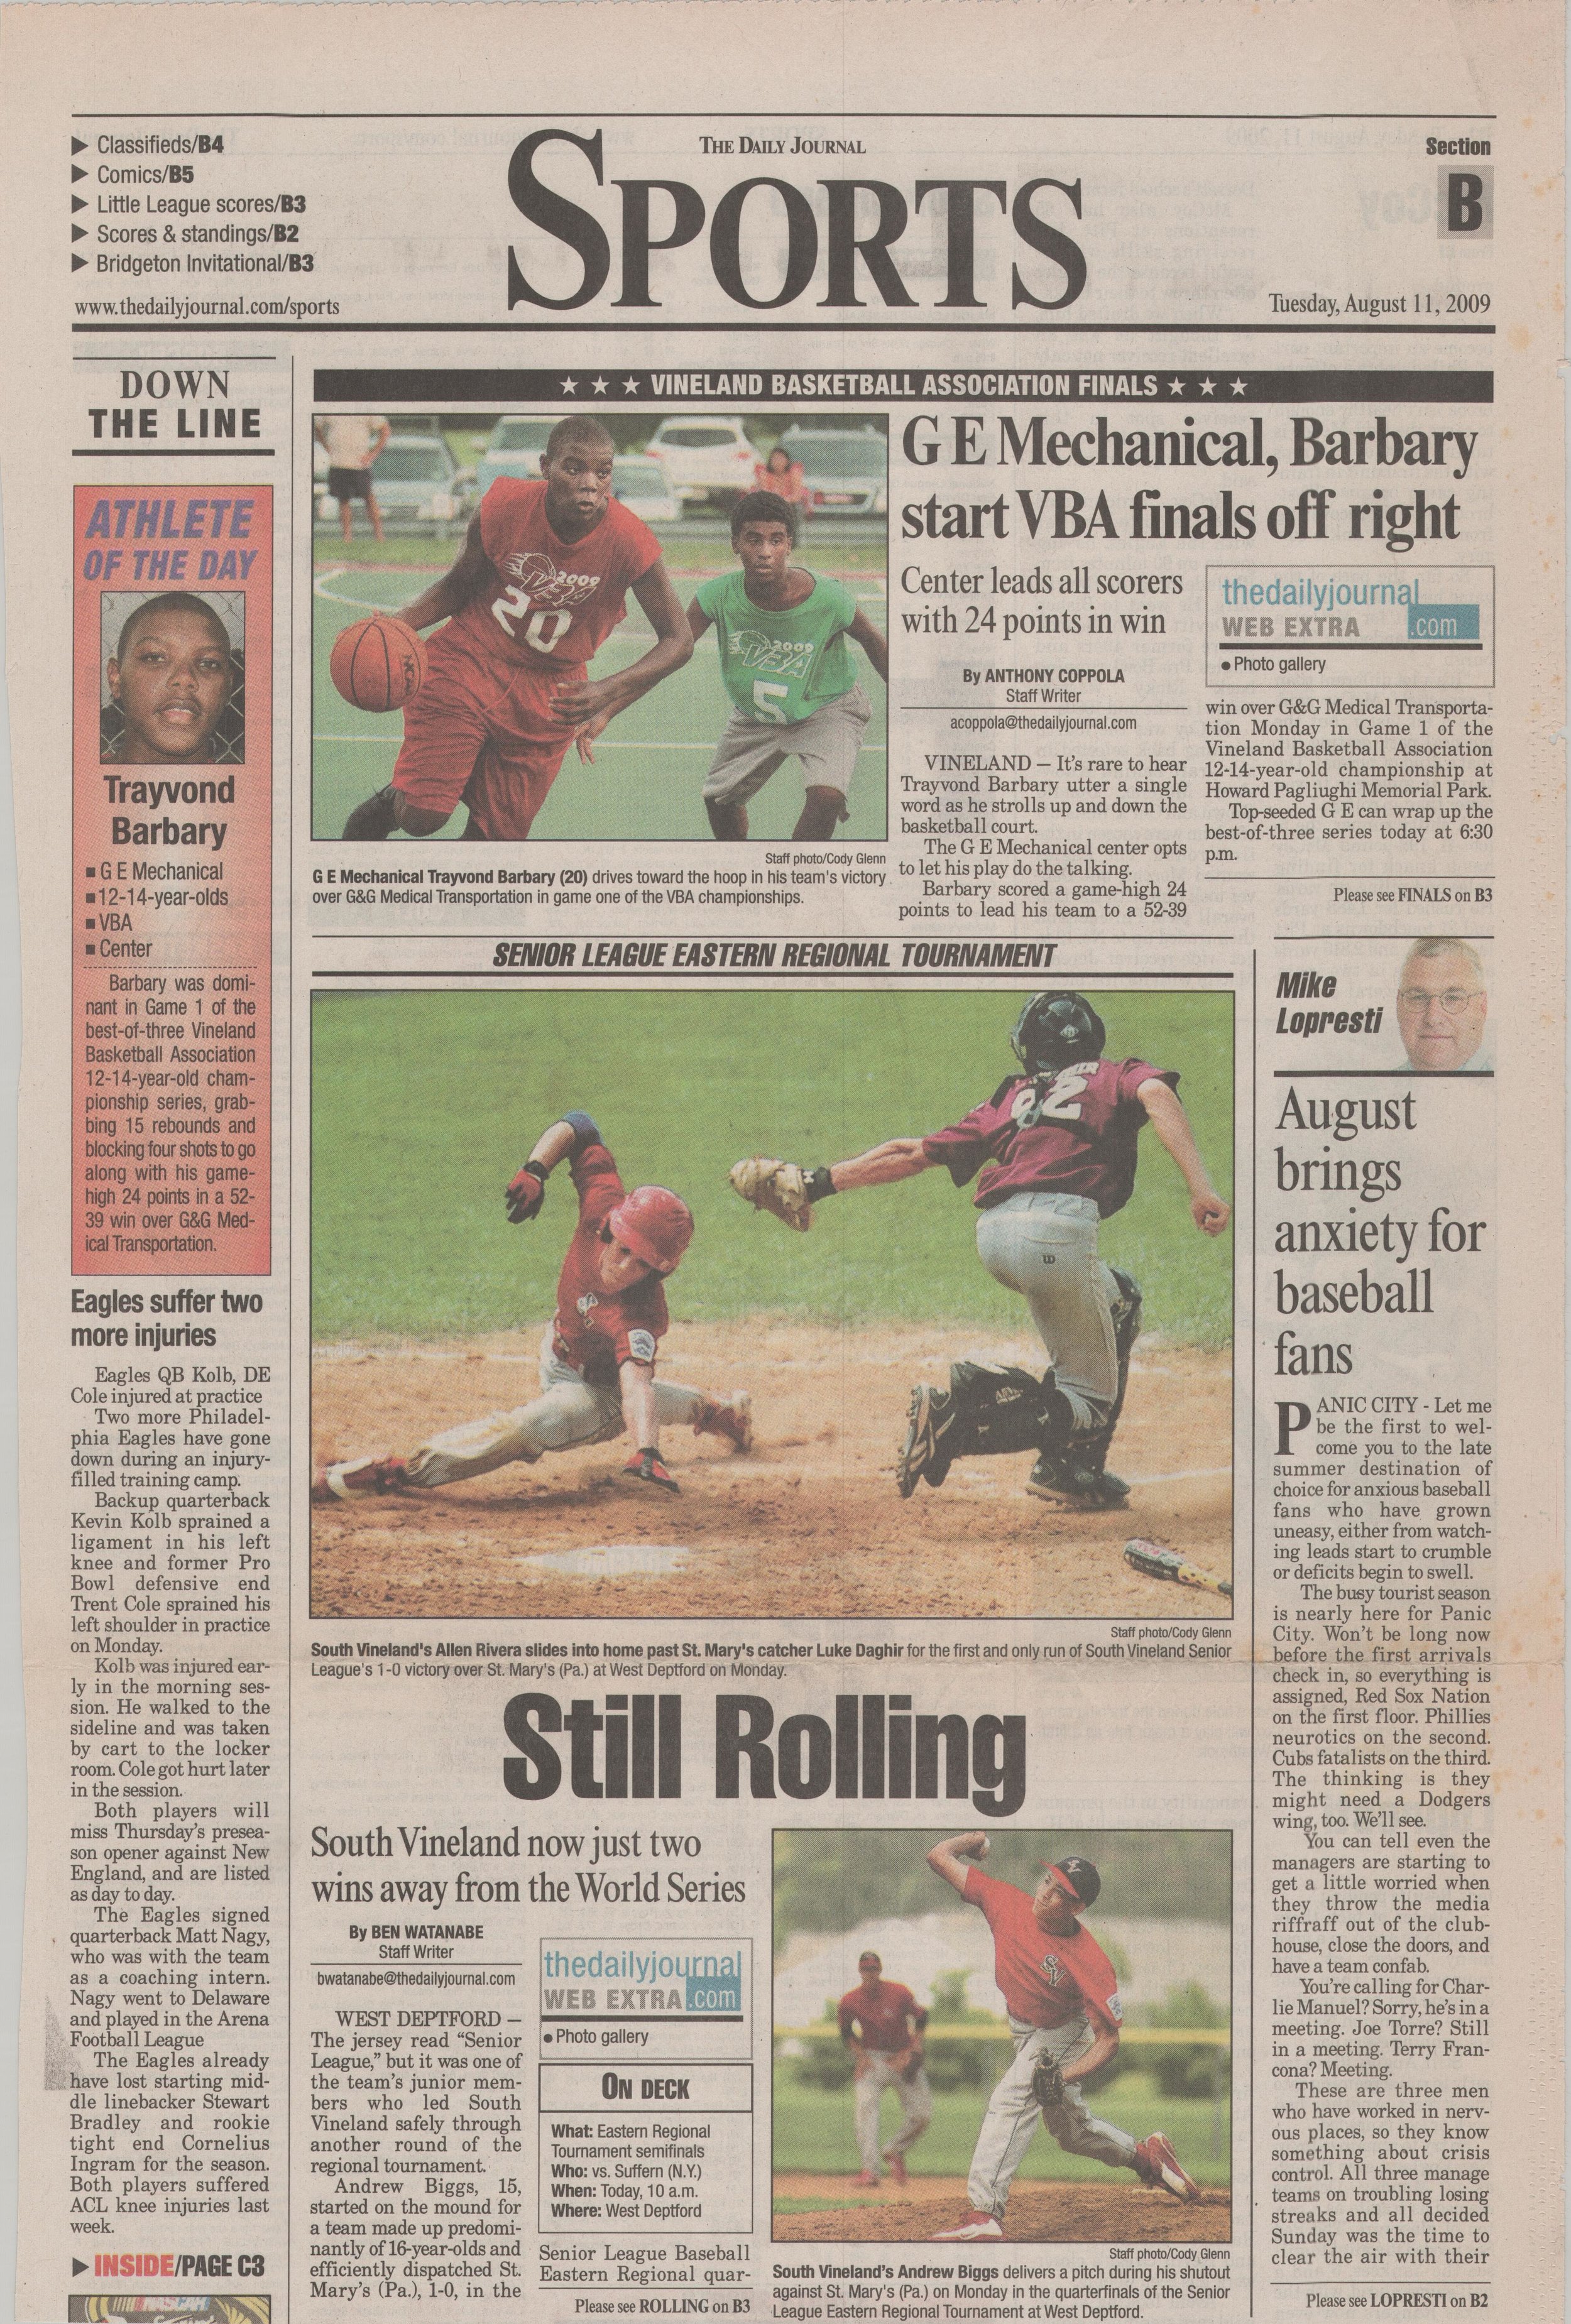  Winning run in the South Vineland Senior League August 11, 2009 /  The Daily Journal  